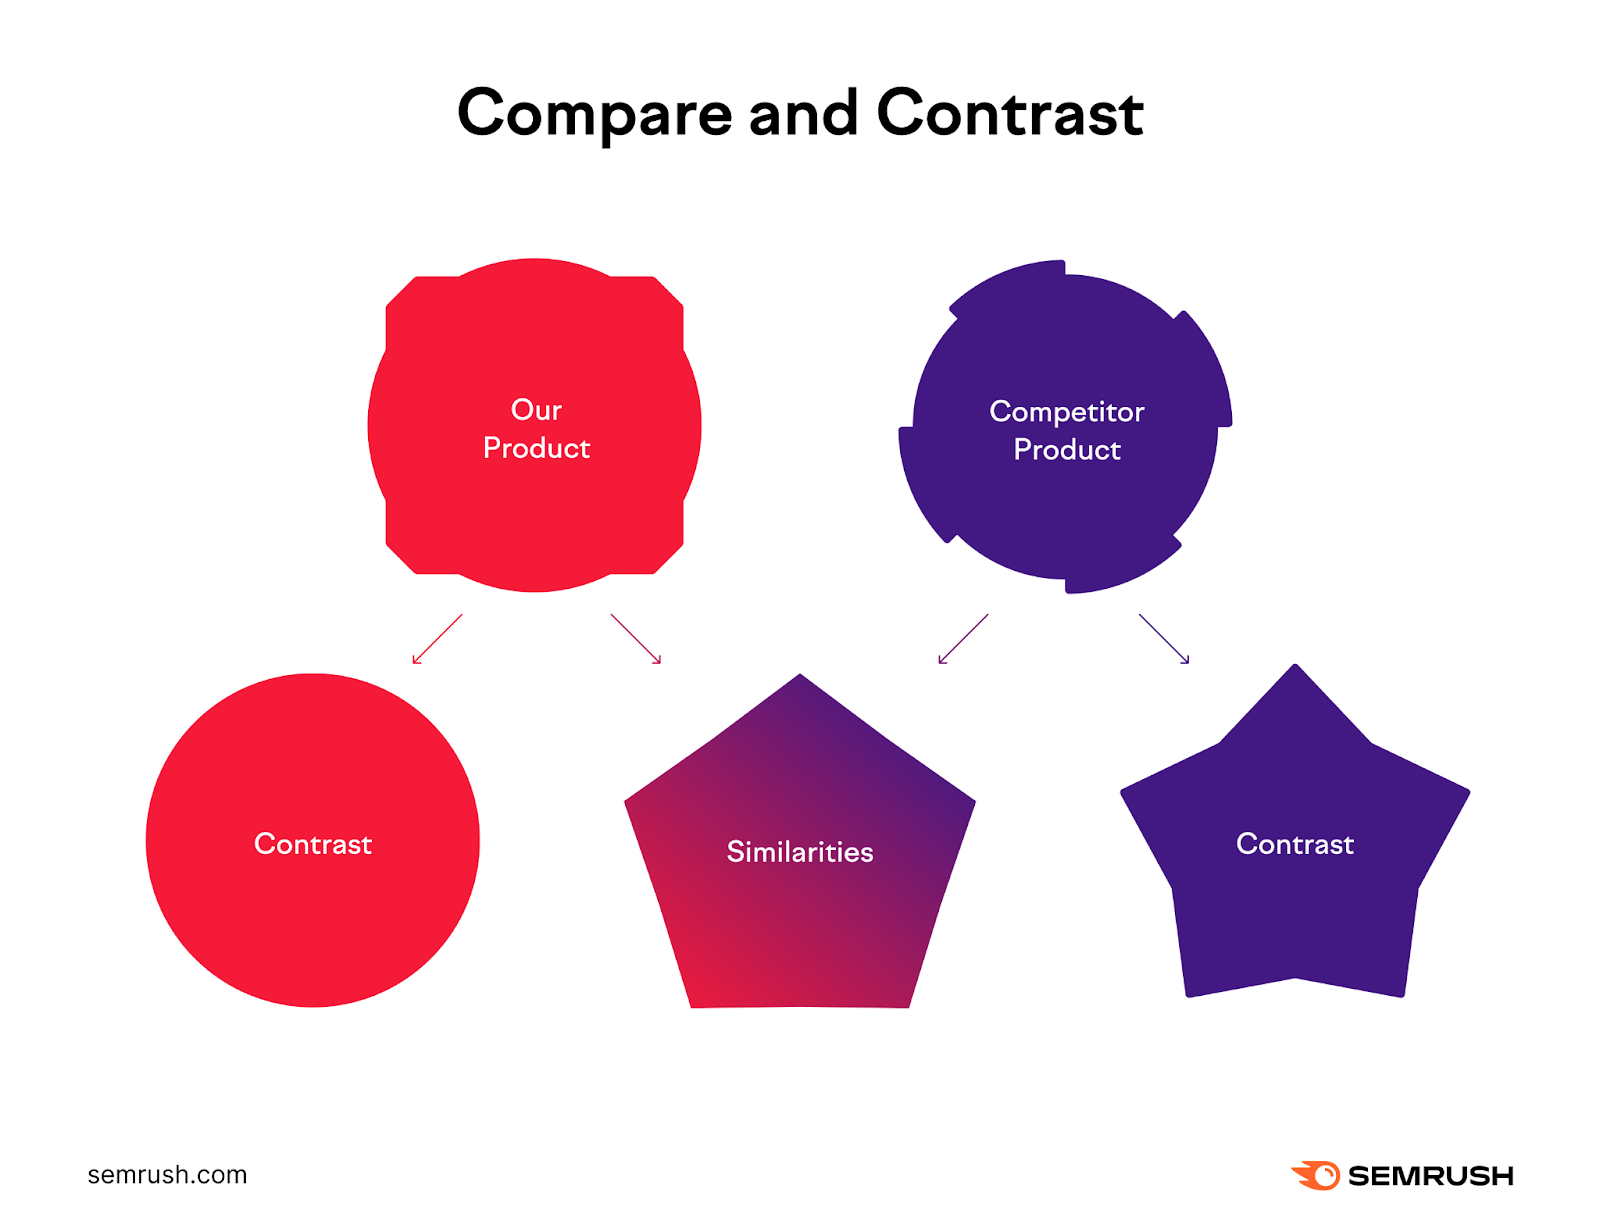 "Compare and Contrast" infographic showing your product and competitor's